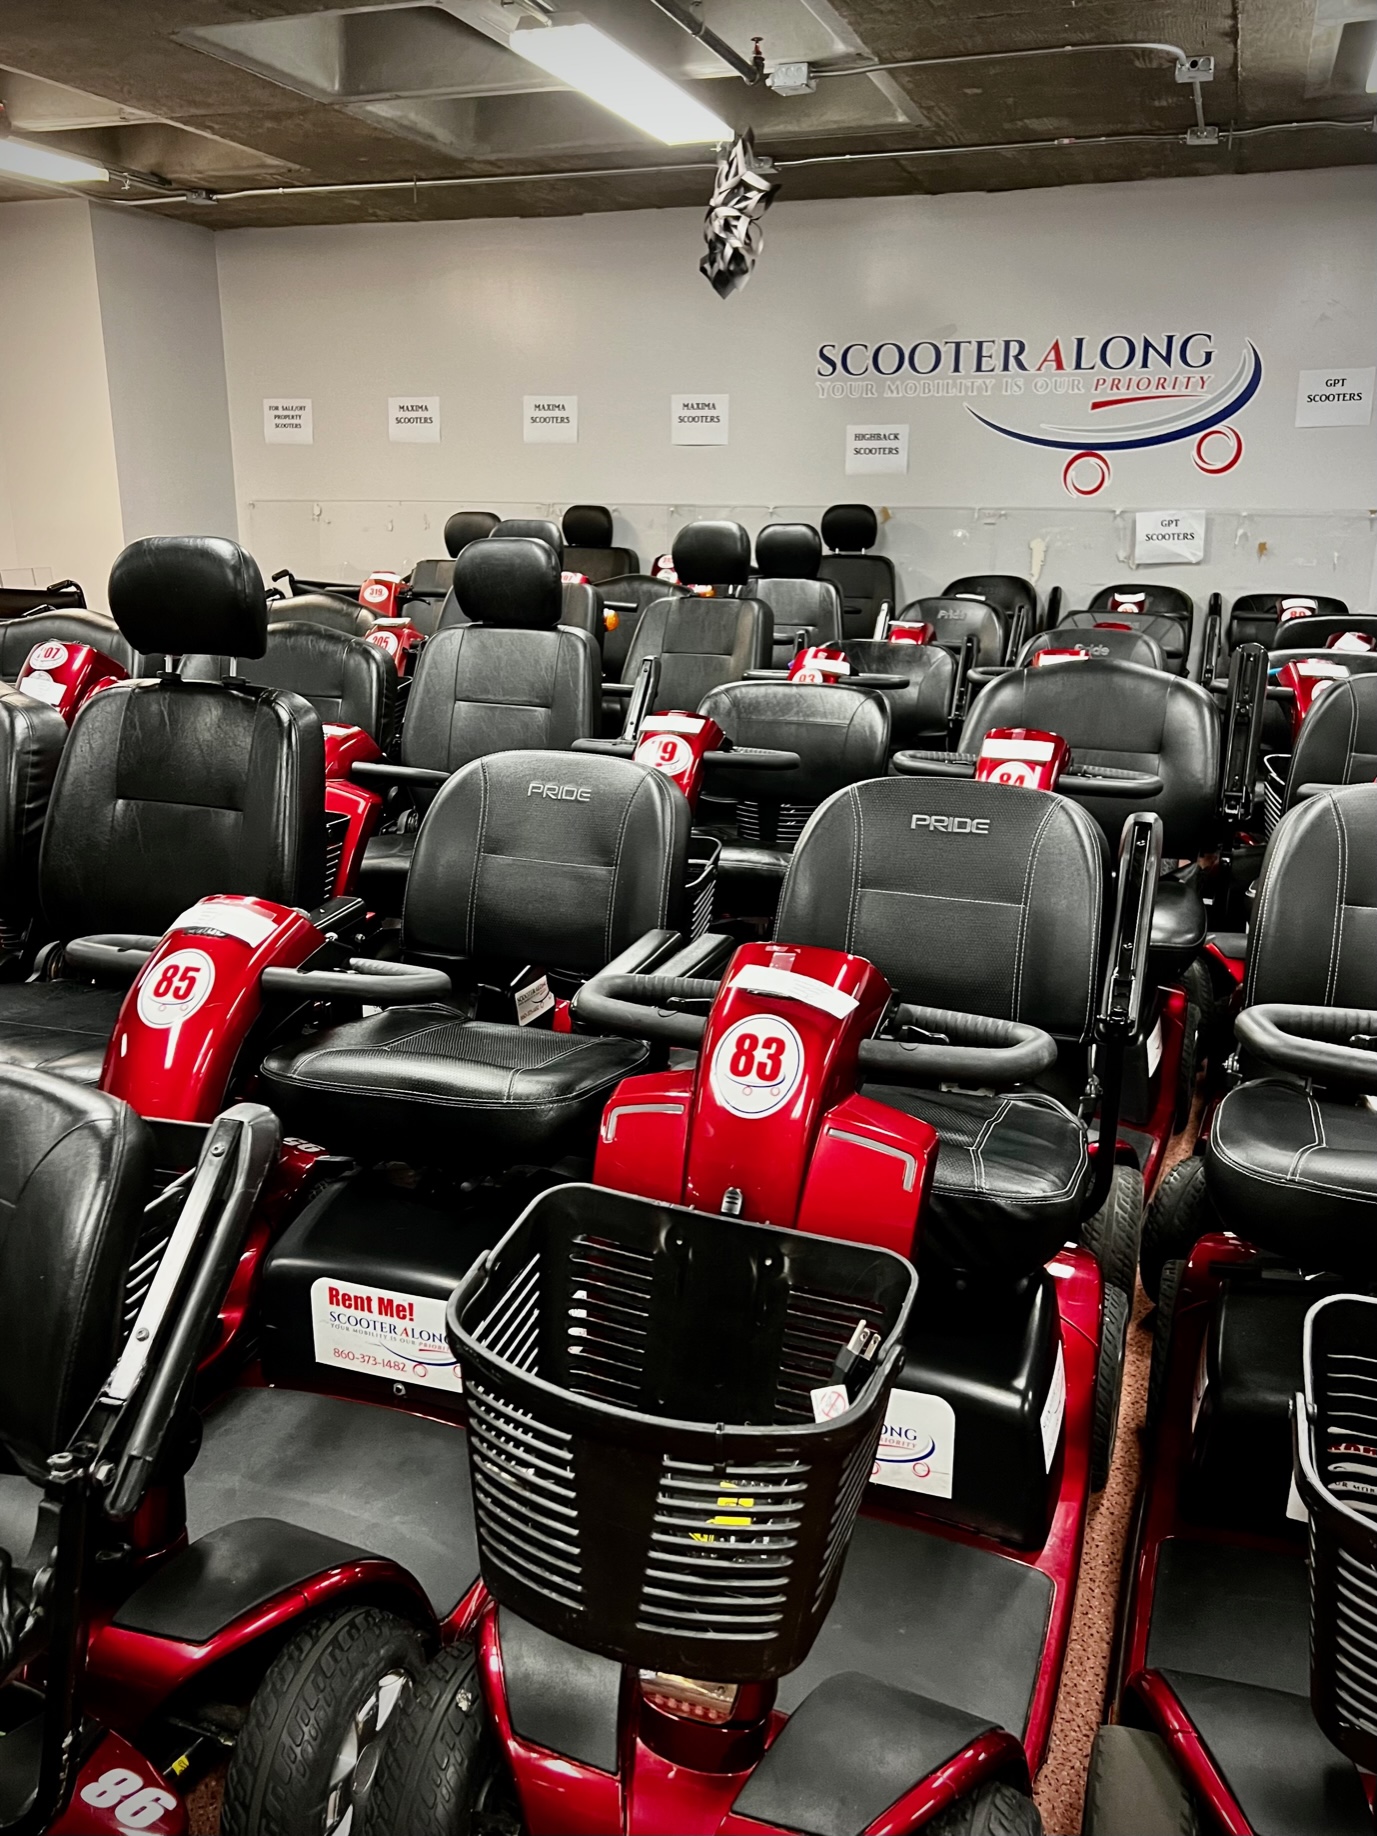 Read more about the article Mobility Scooter Rentals at Foxwoods Resort Casino